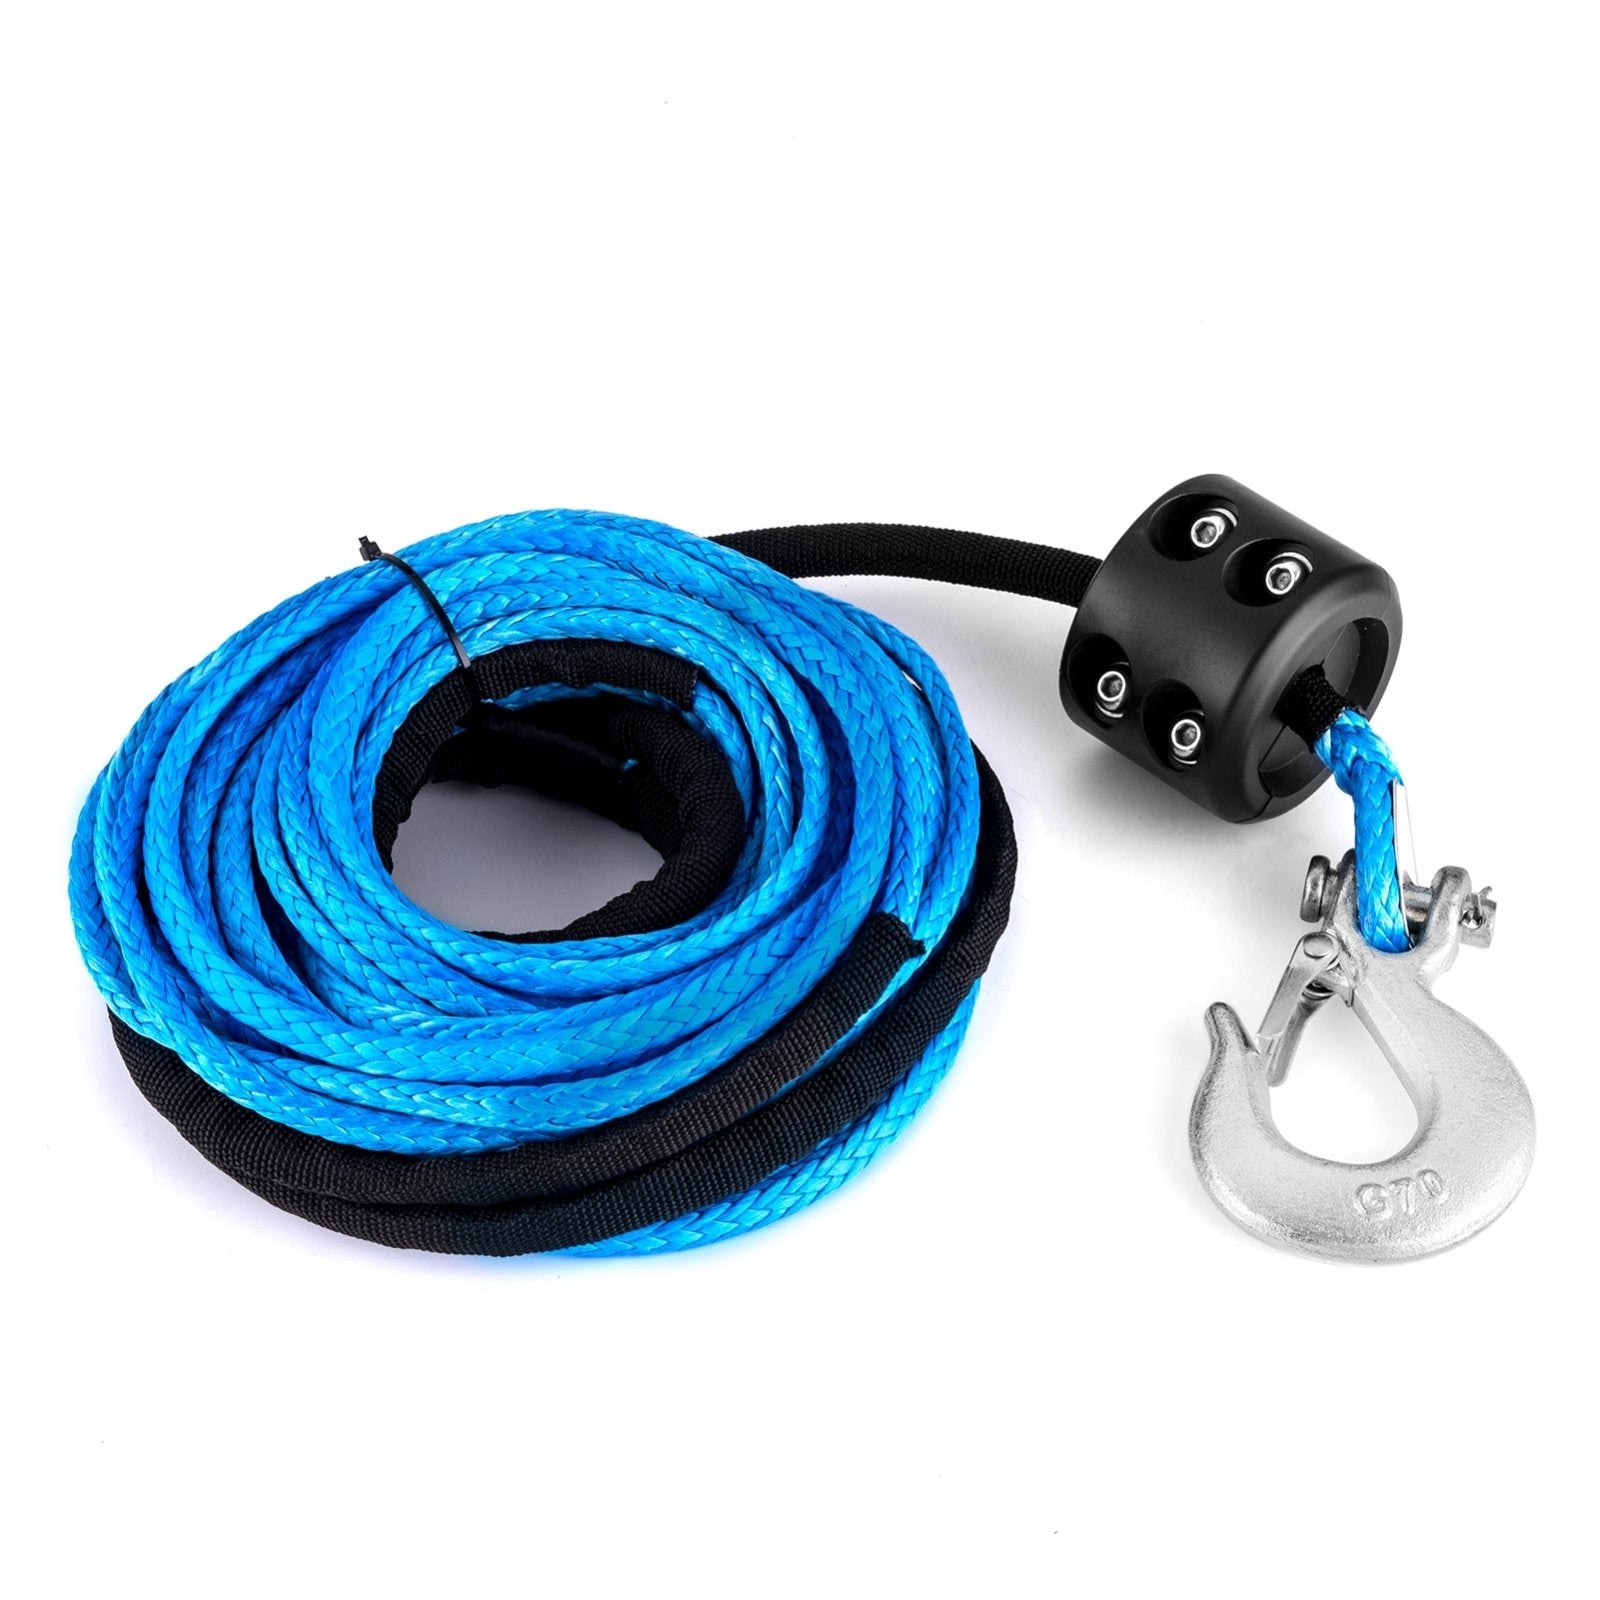 UTV ATV 3/16" x 50' Synthetic Winch Rope w/ Clevis Slip Hook Cable Stopper Kit for 7000LBs - Weisen